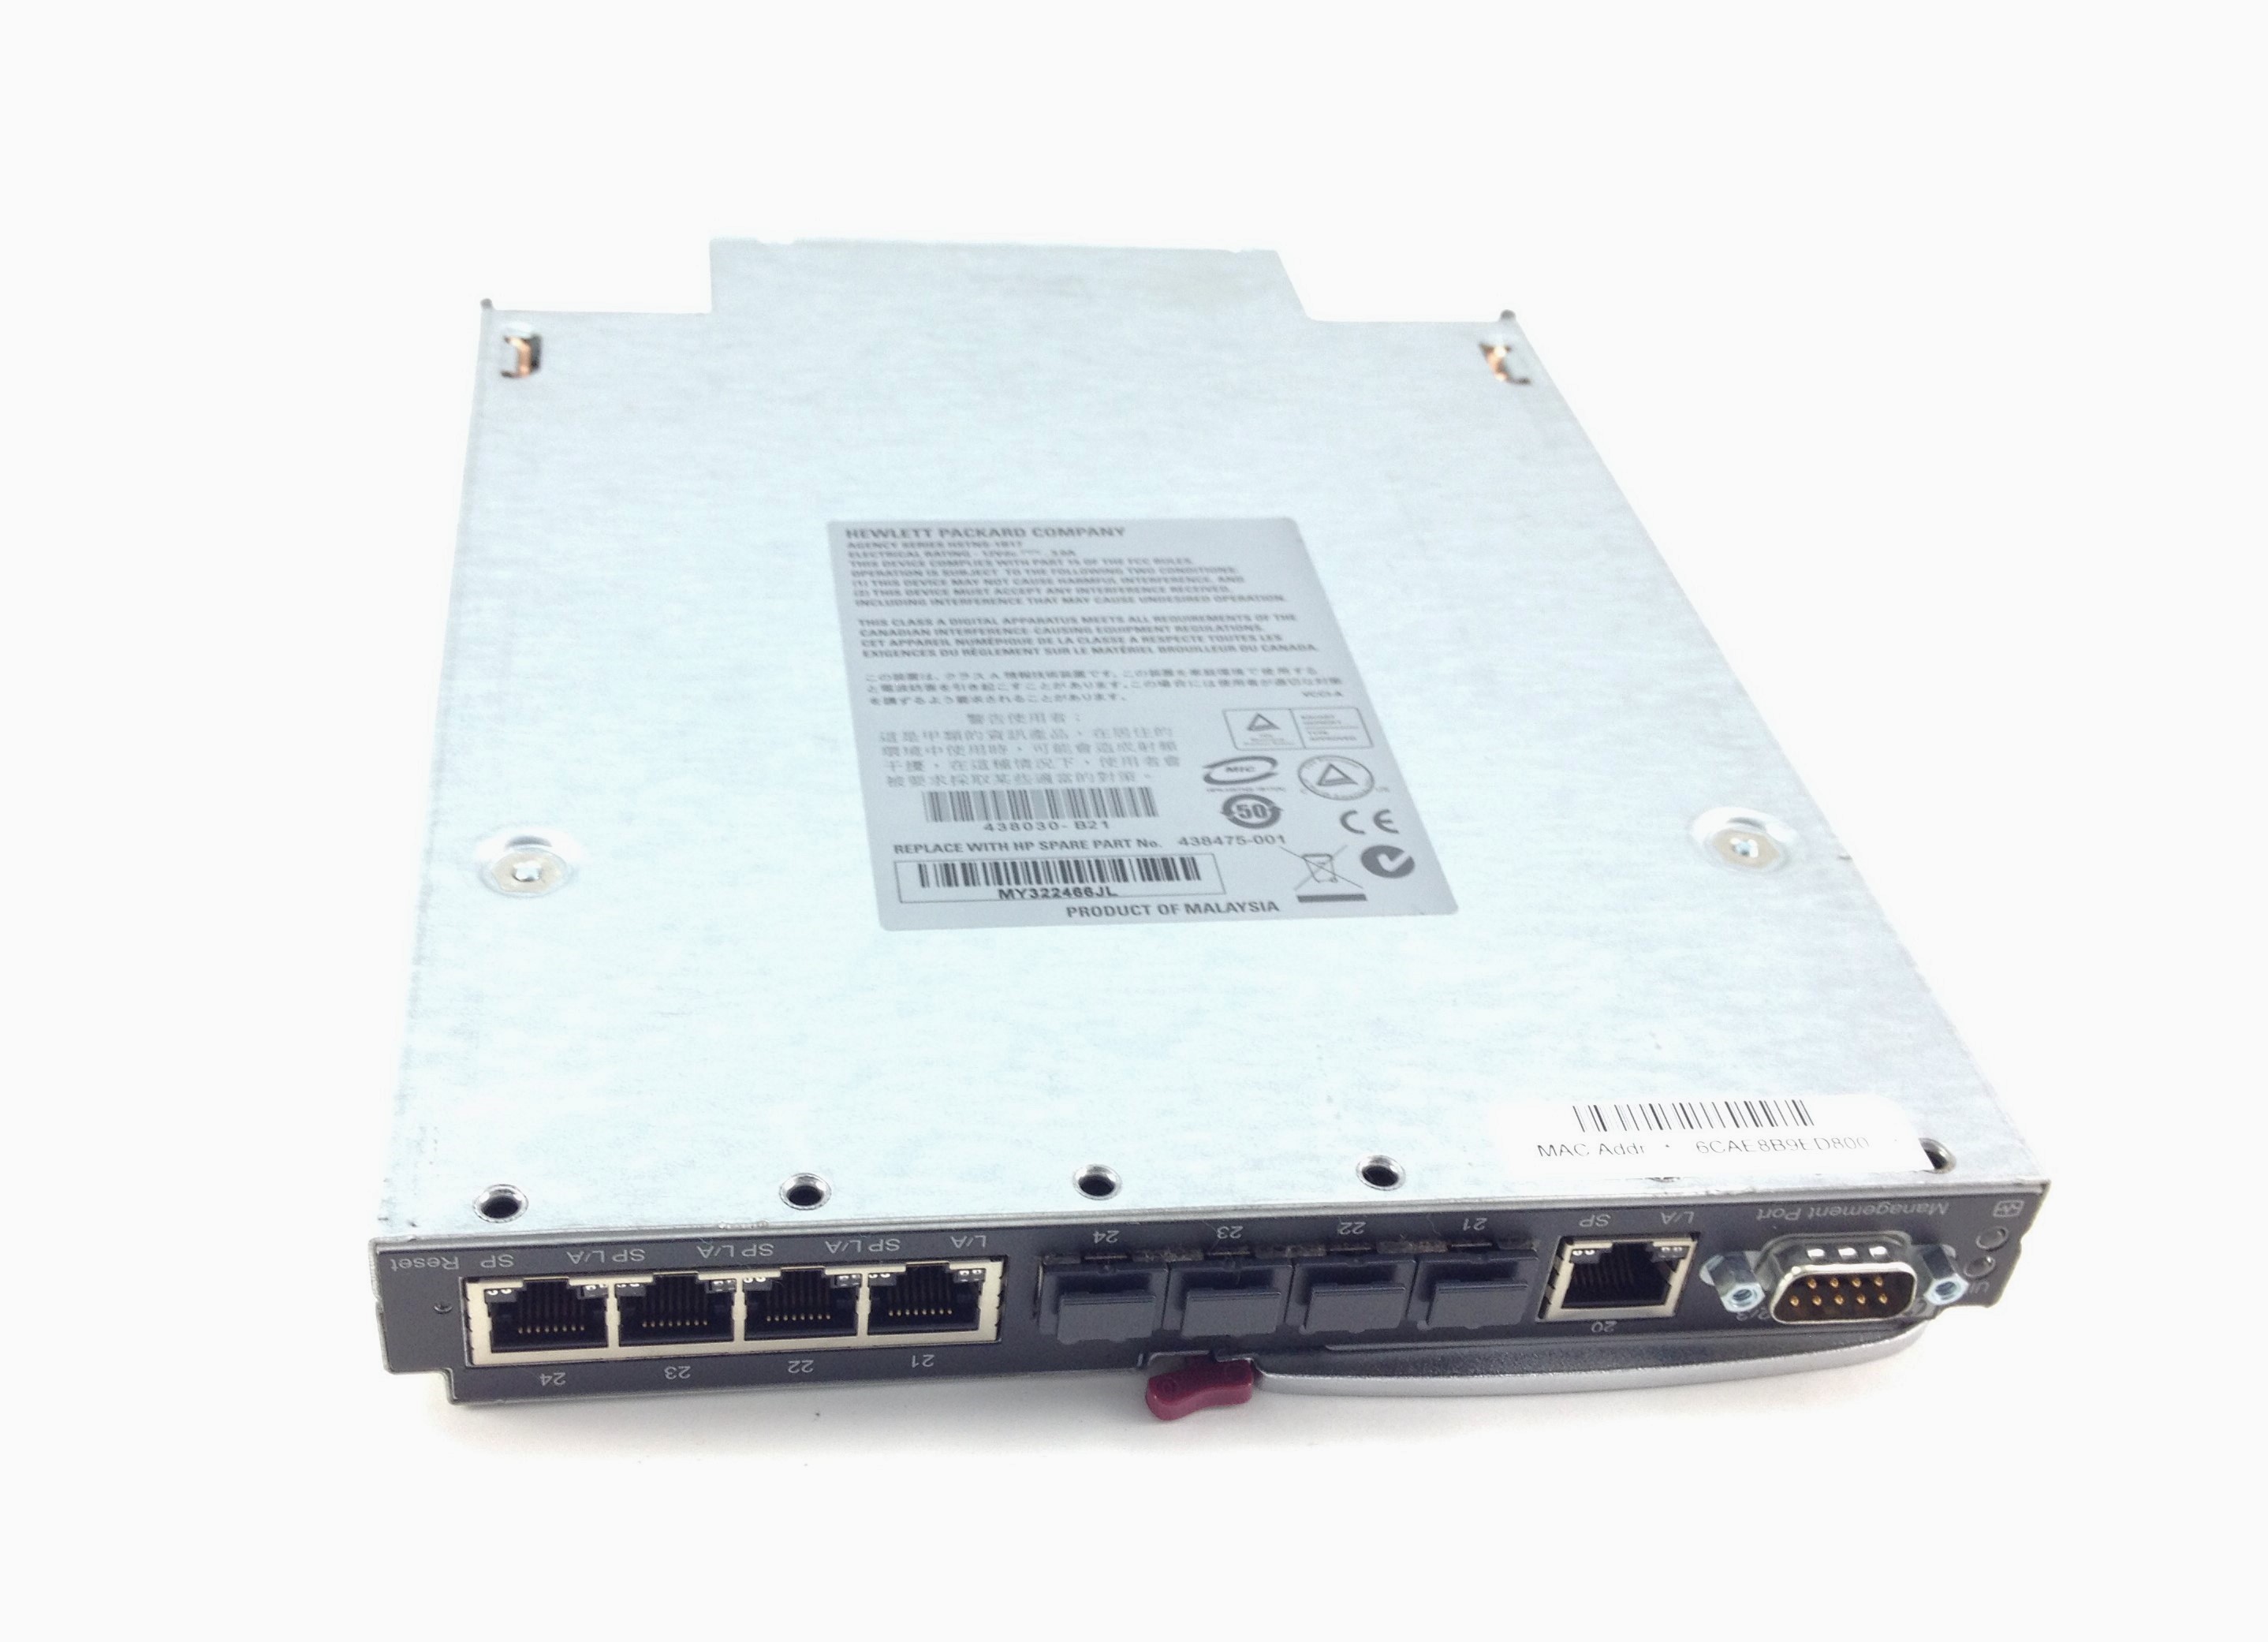 HP Gbe2C Layer 2/3 Ethernet Blade Switch (438030-B21)